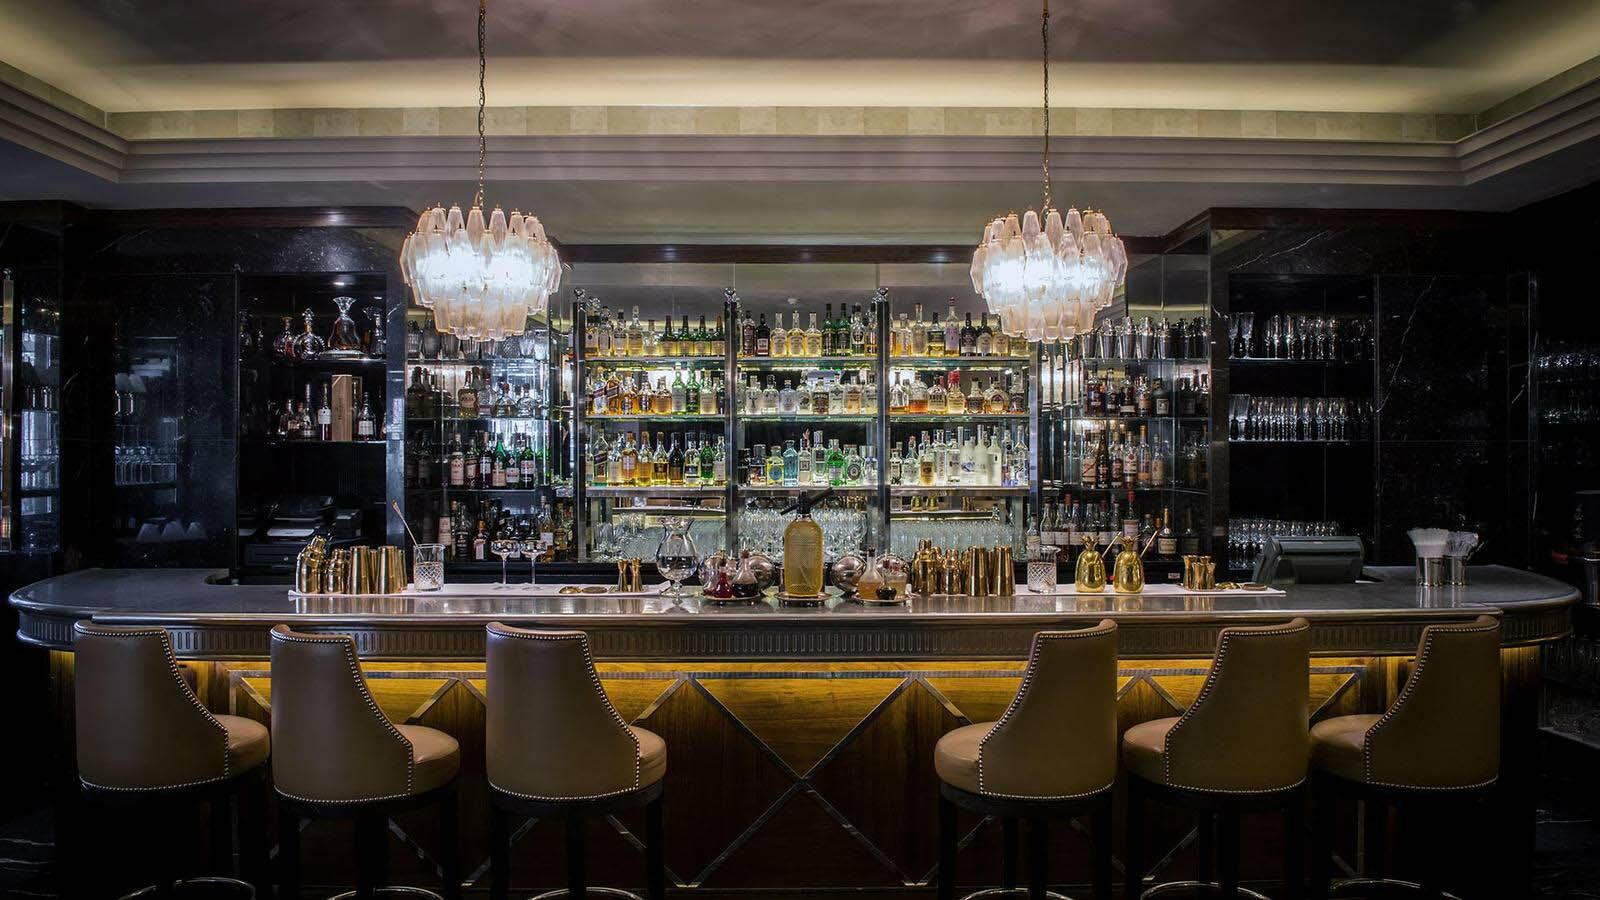 seating at the bar in The Sidecar bar at The Westbury